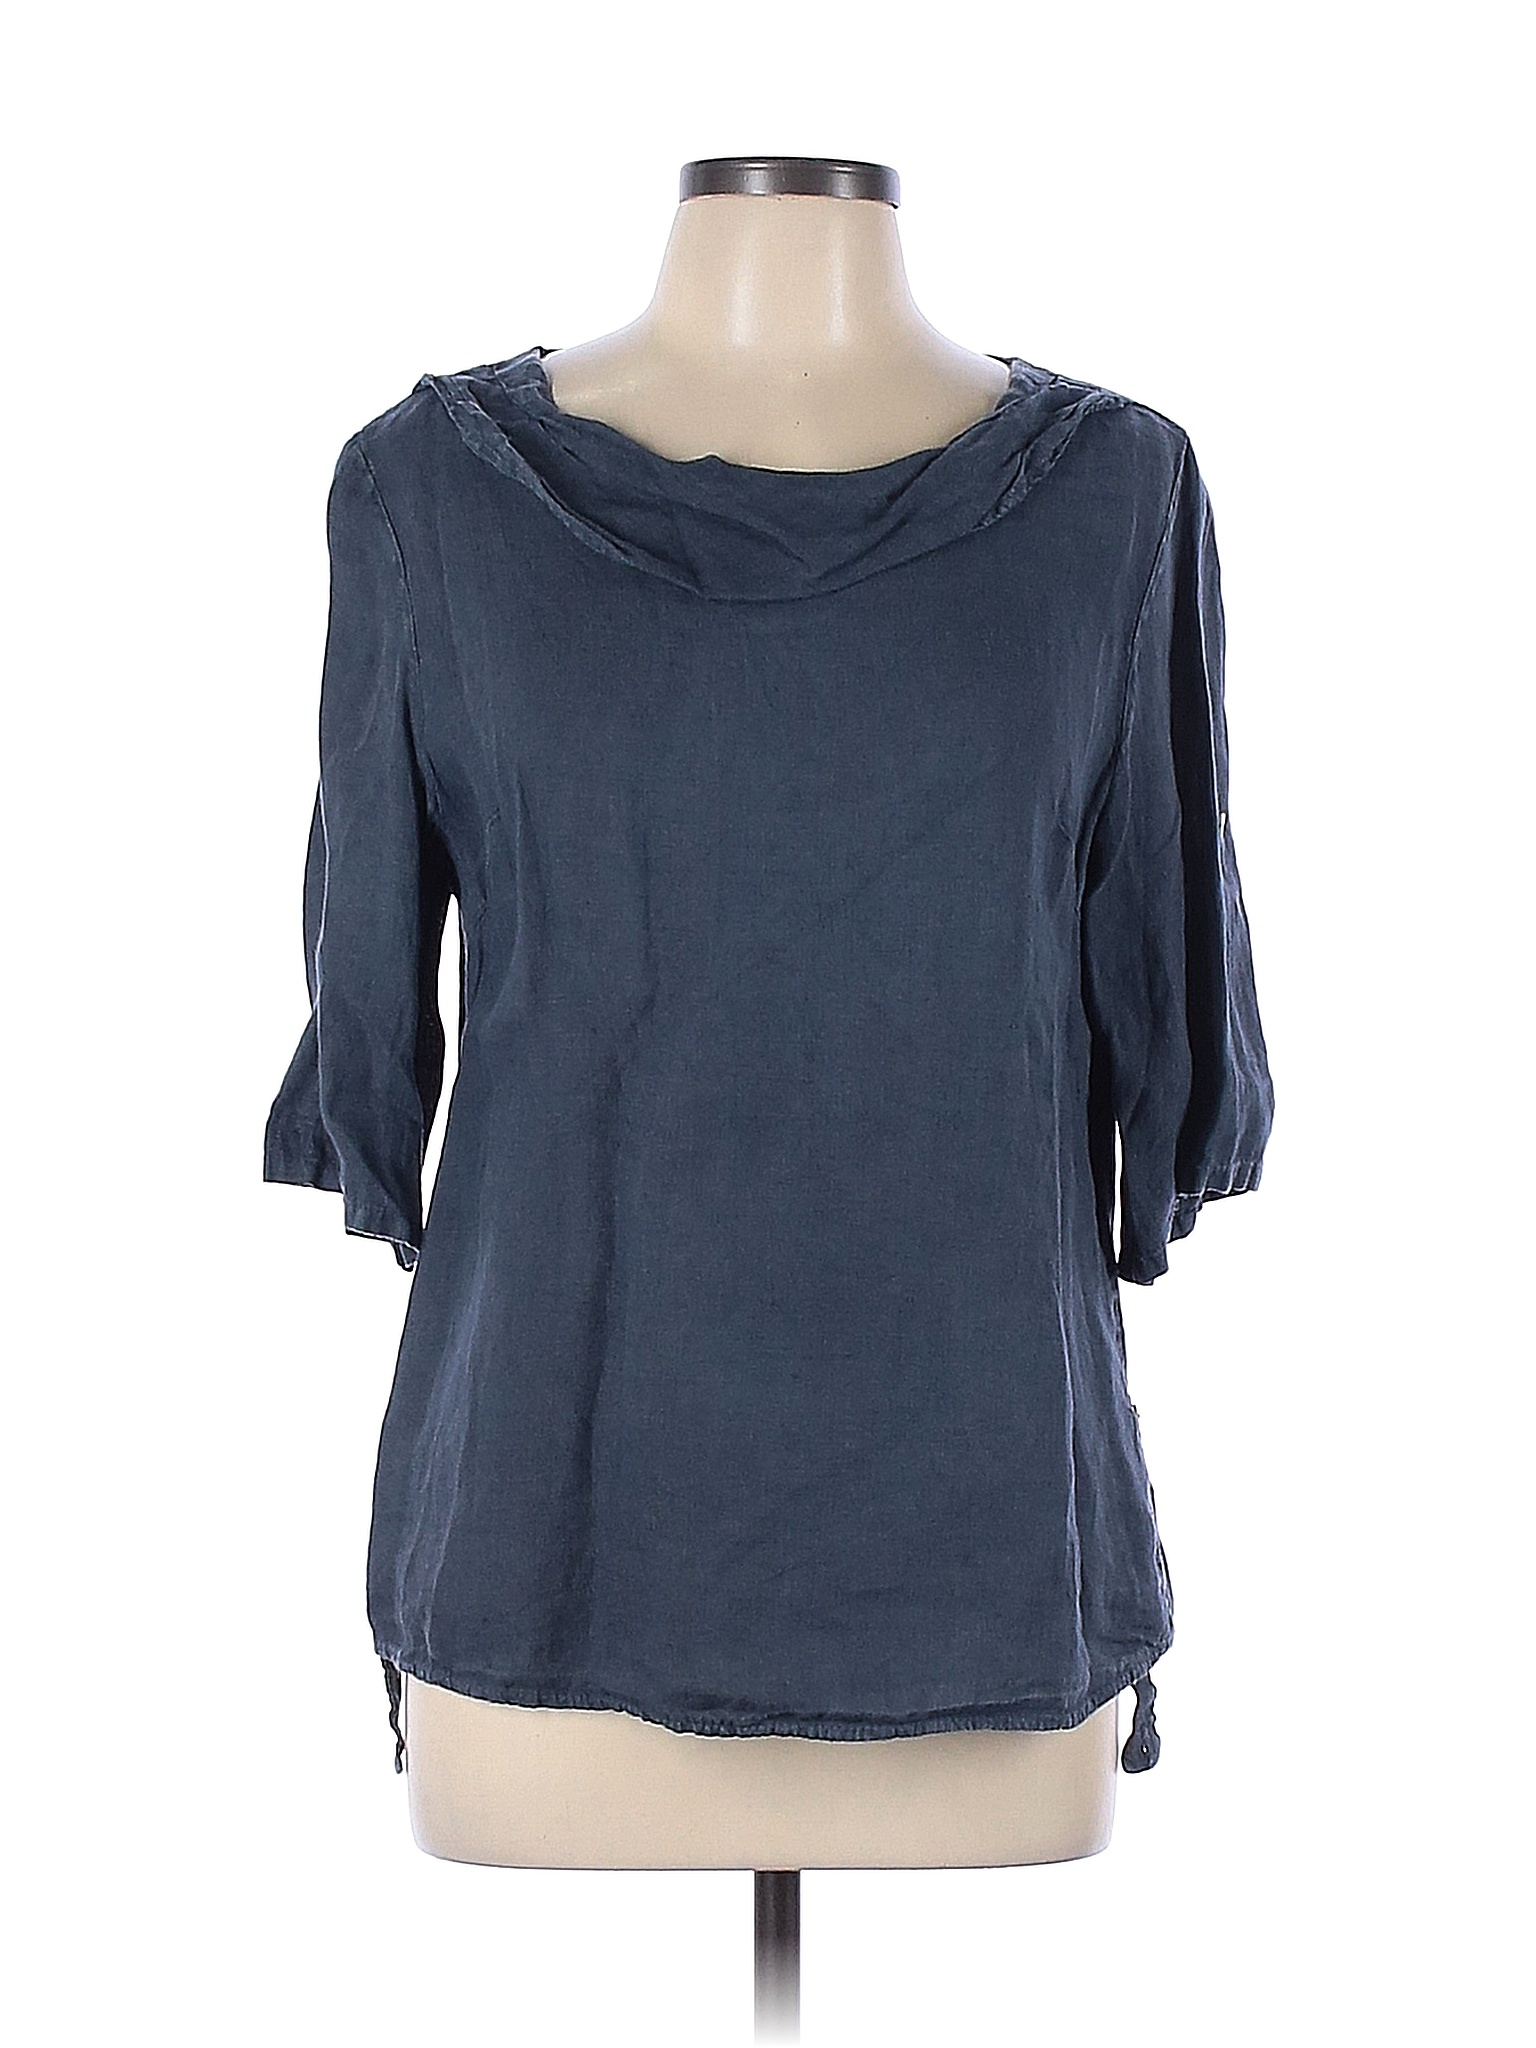 Lina Tomei Solid Blue Long Sleeve Blouse Size L - 77% off | thredUP